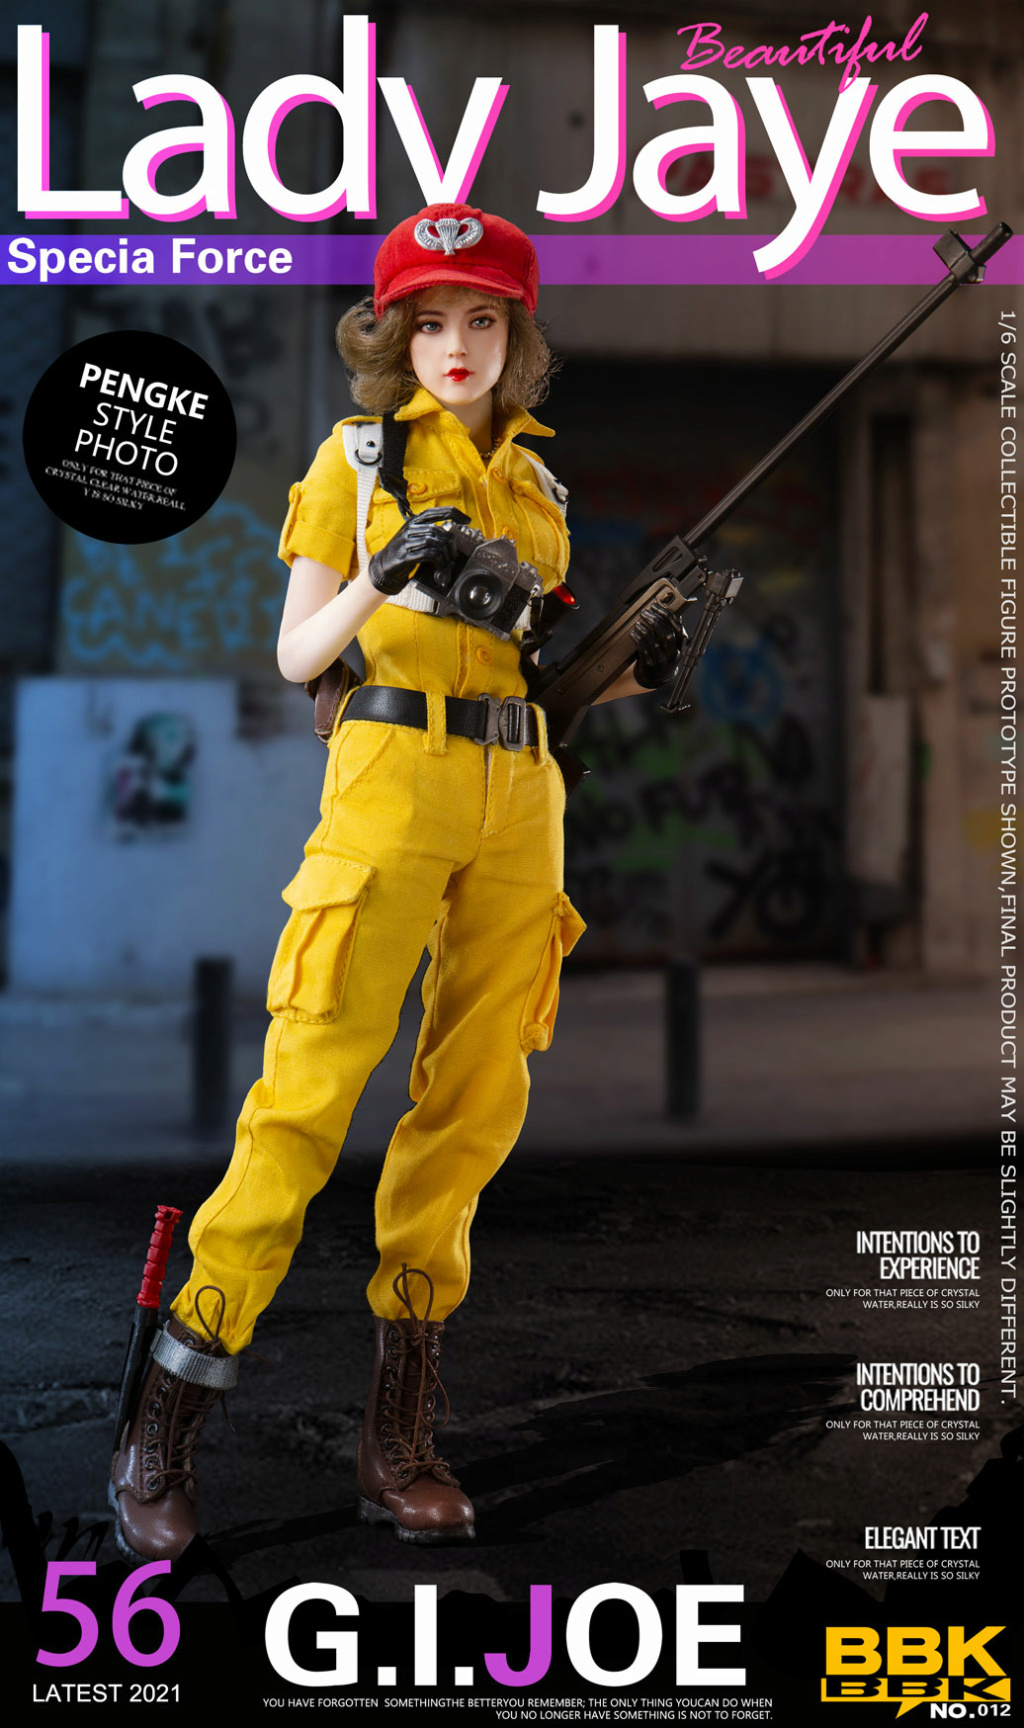 NEW PRODUCT: BBK: 1/6 GIJOE Jay Female Soldier Action Figure# 14575711